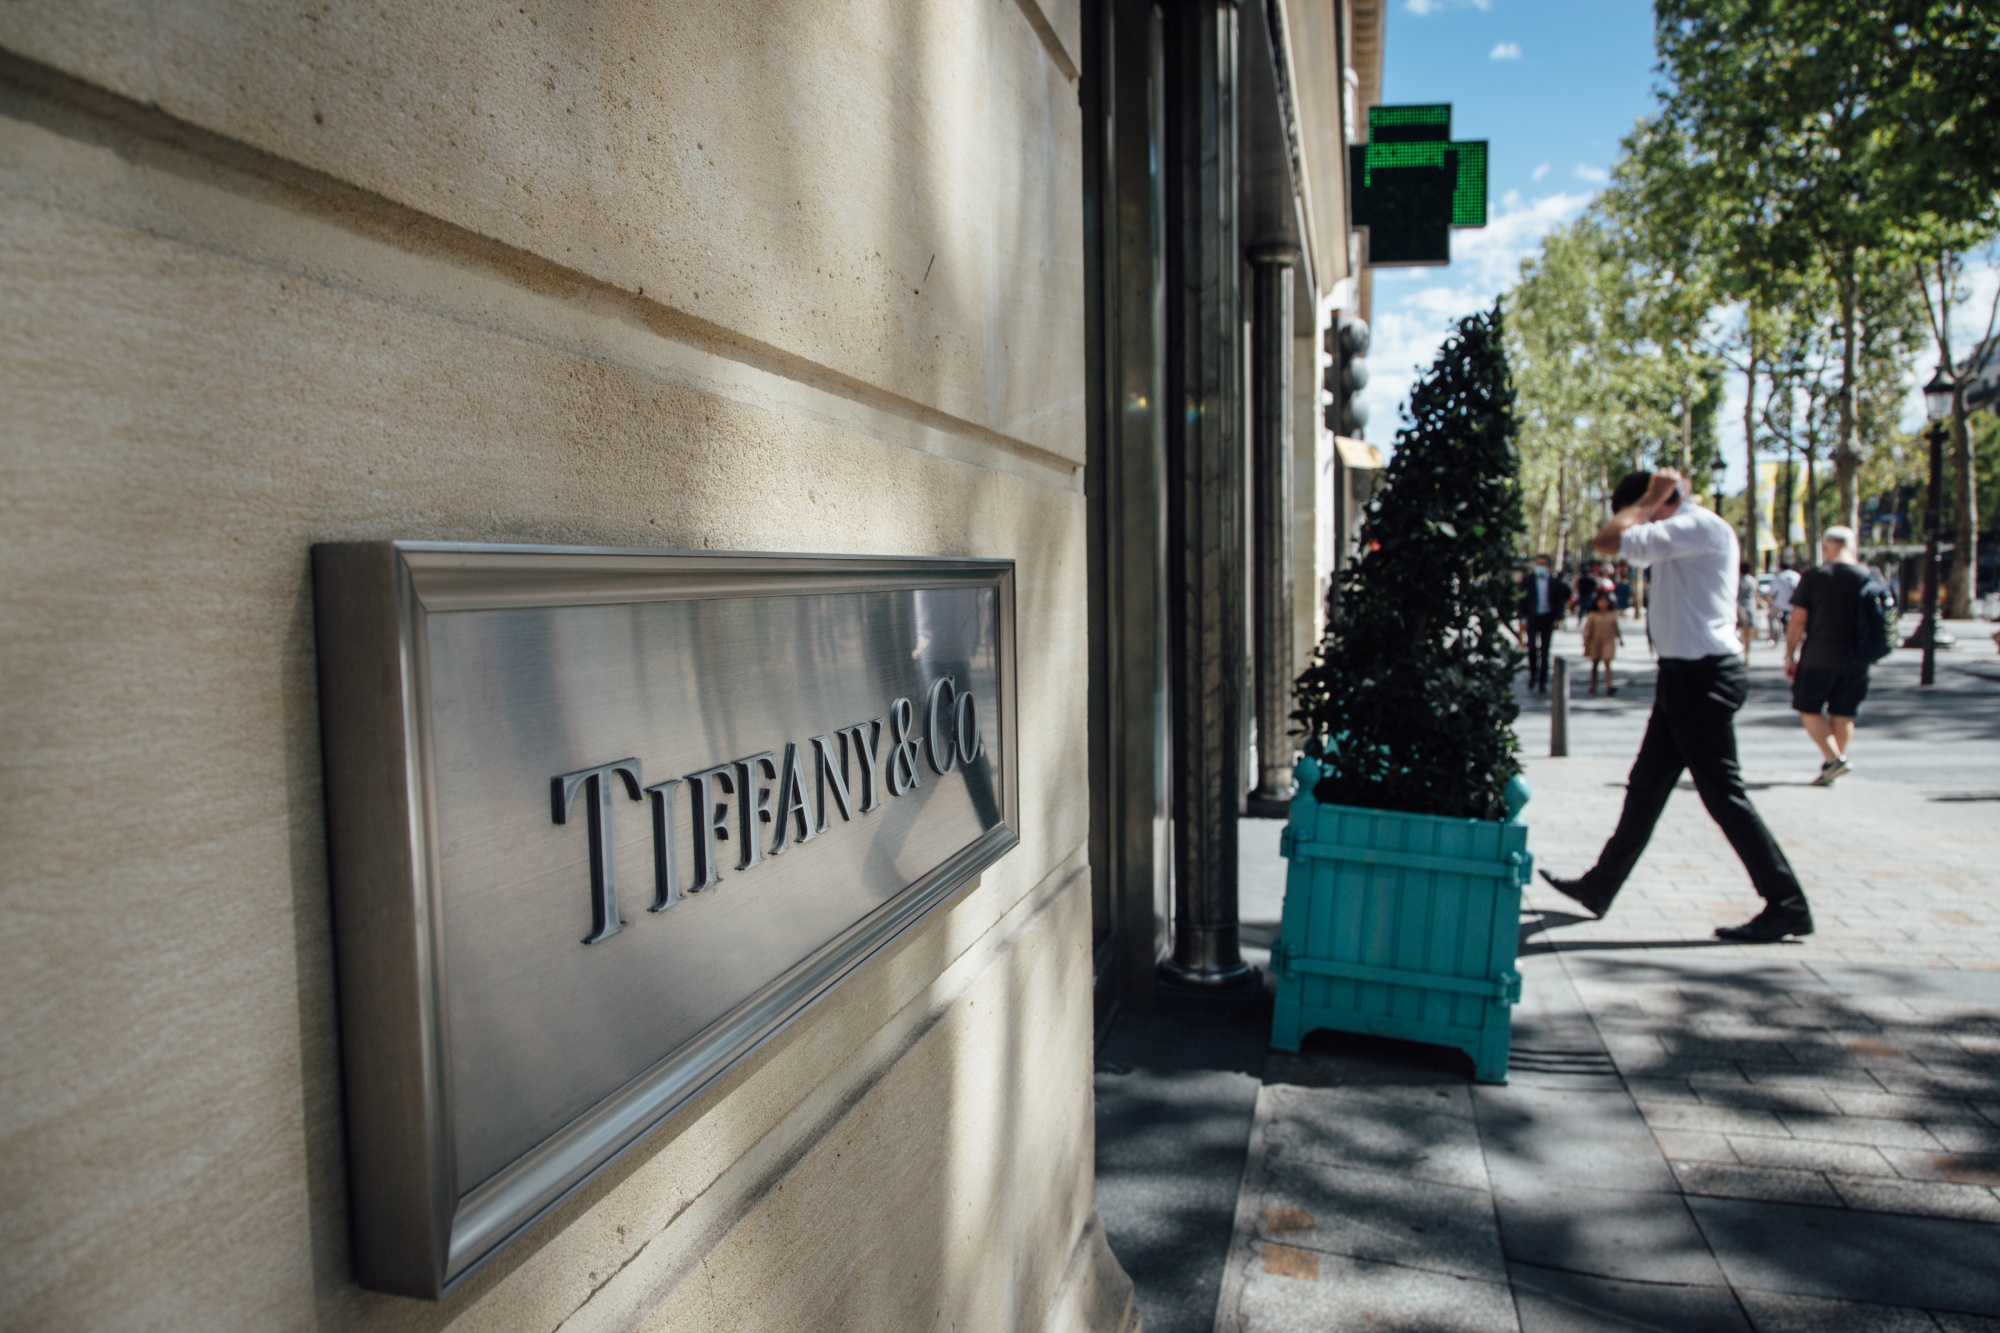 LVMH to Sue Tiffany, Challenge Its Handling of Covid Crisis - Bloomberg